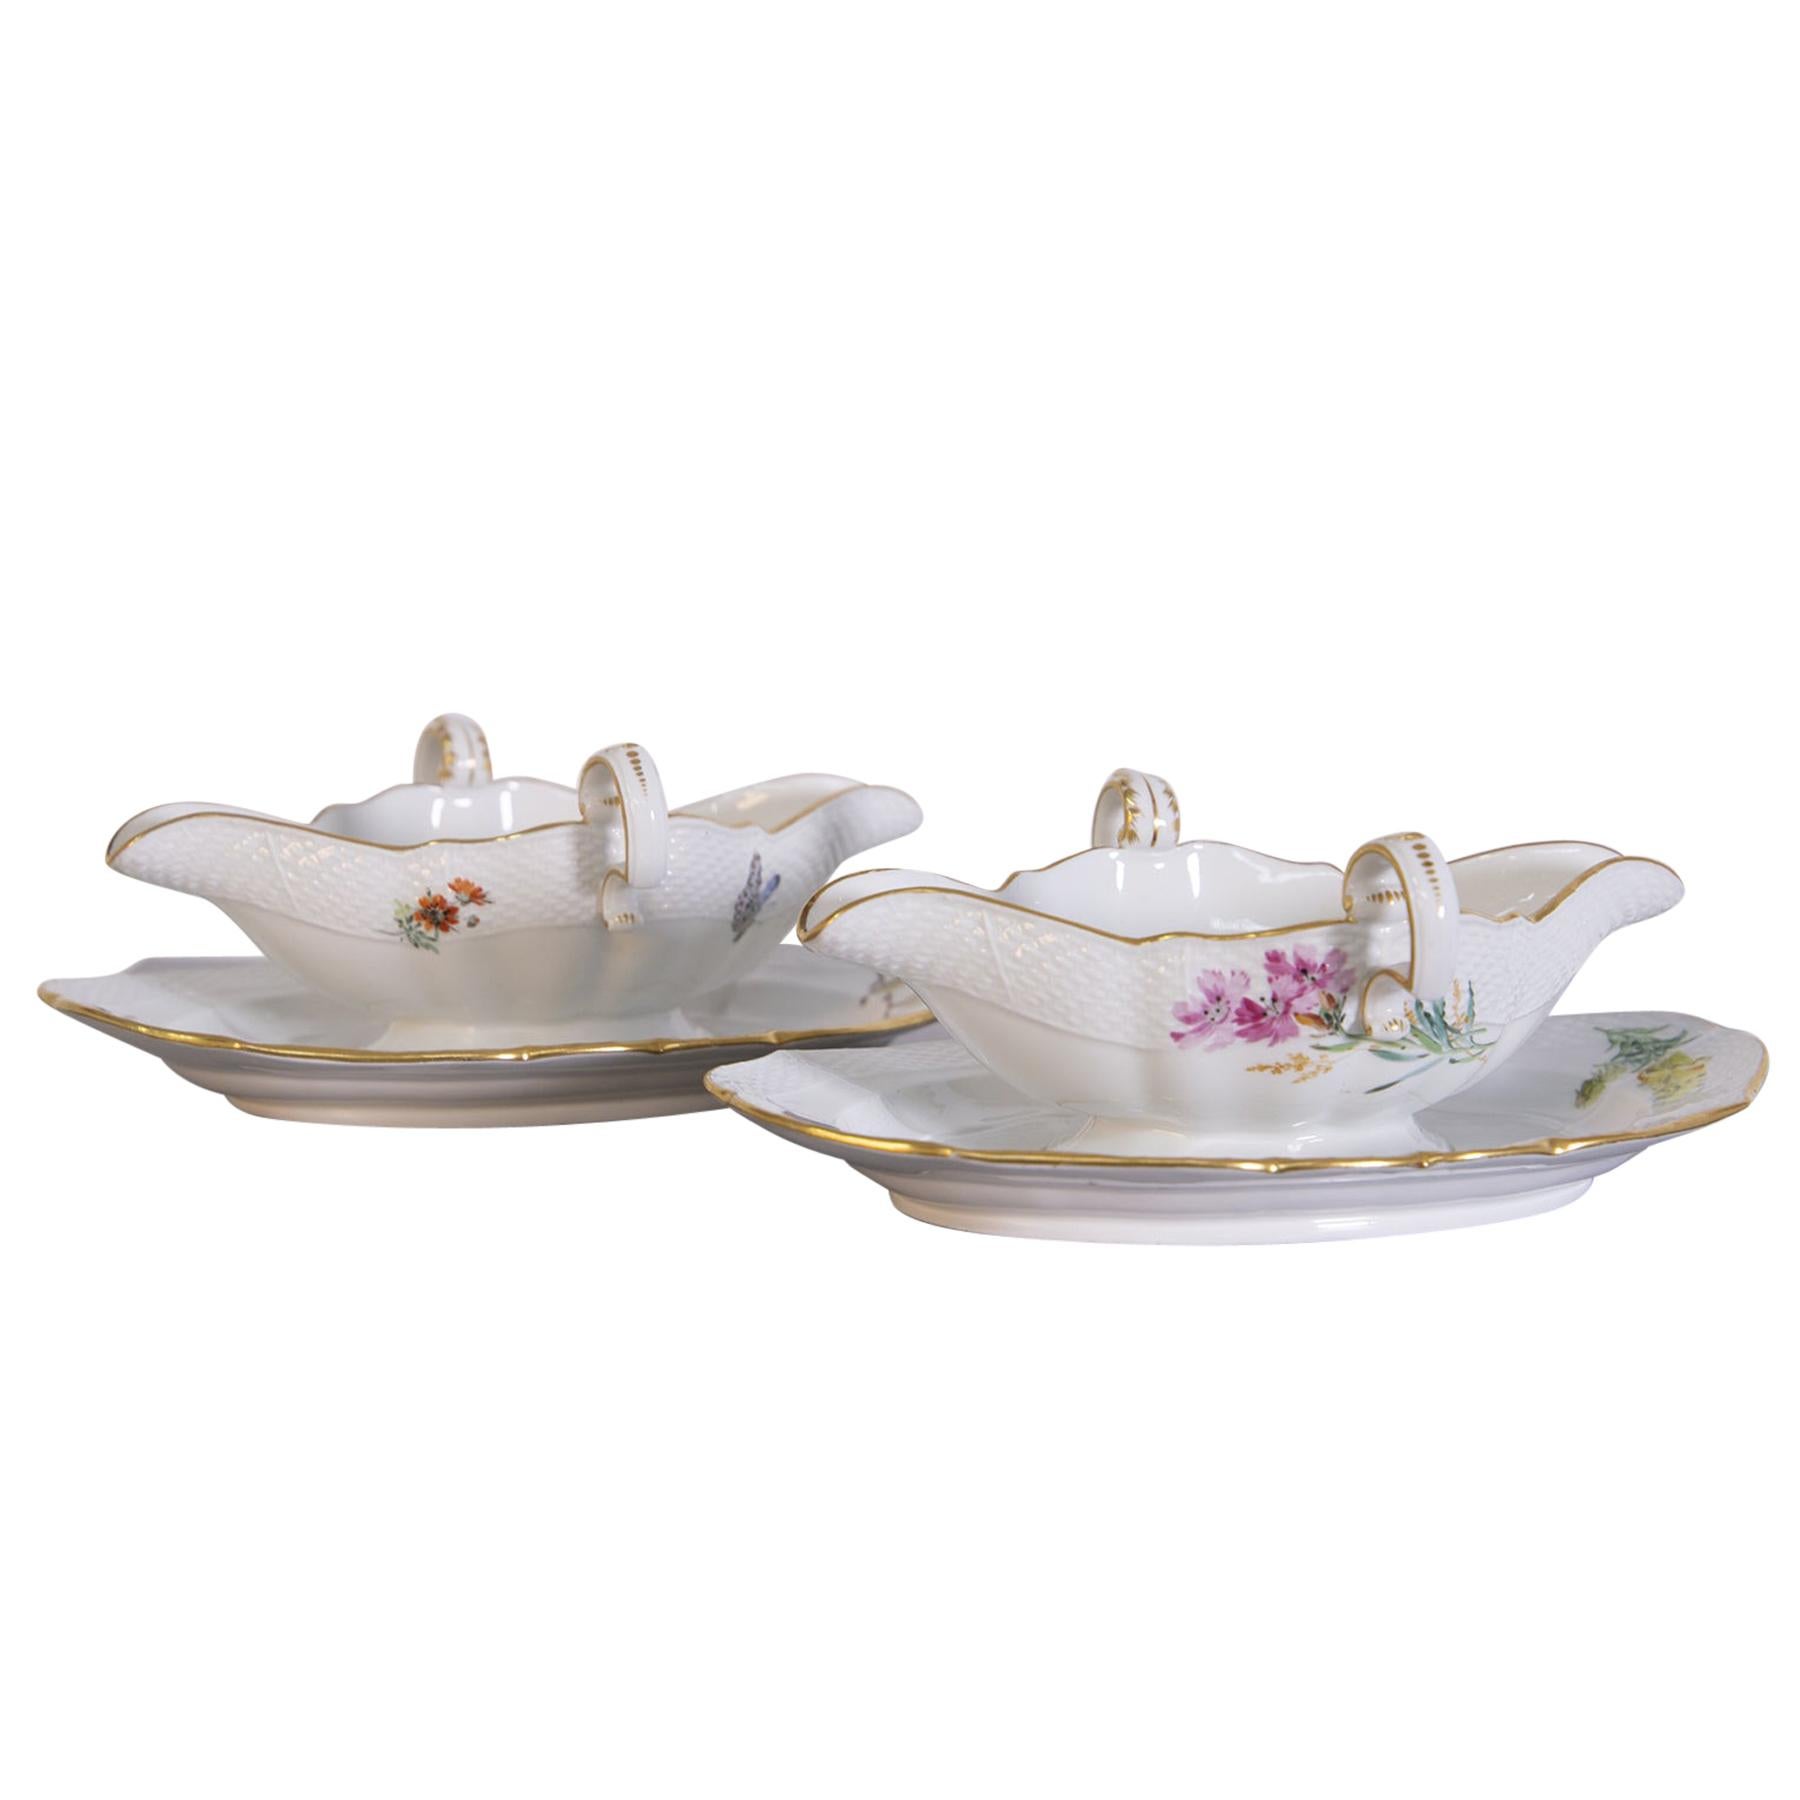 Pair of Meissen Legume Dishes from the Marcolini Period, 18th Century For Sale